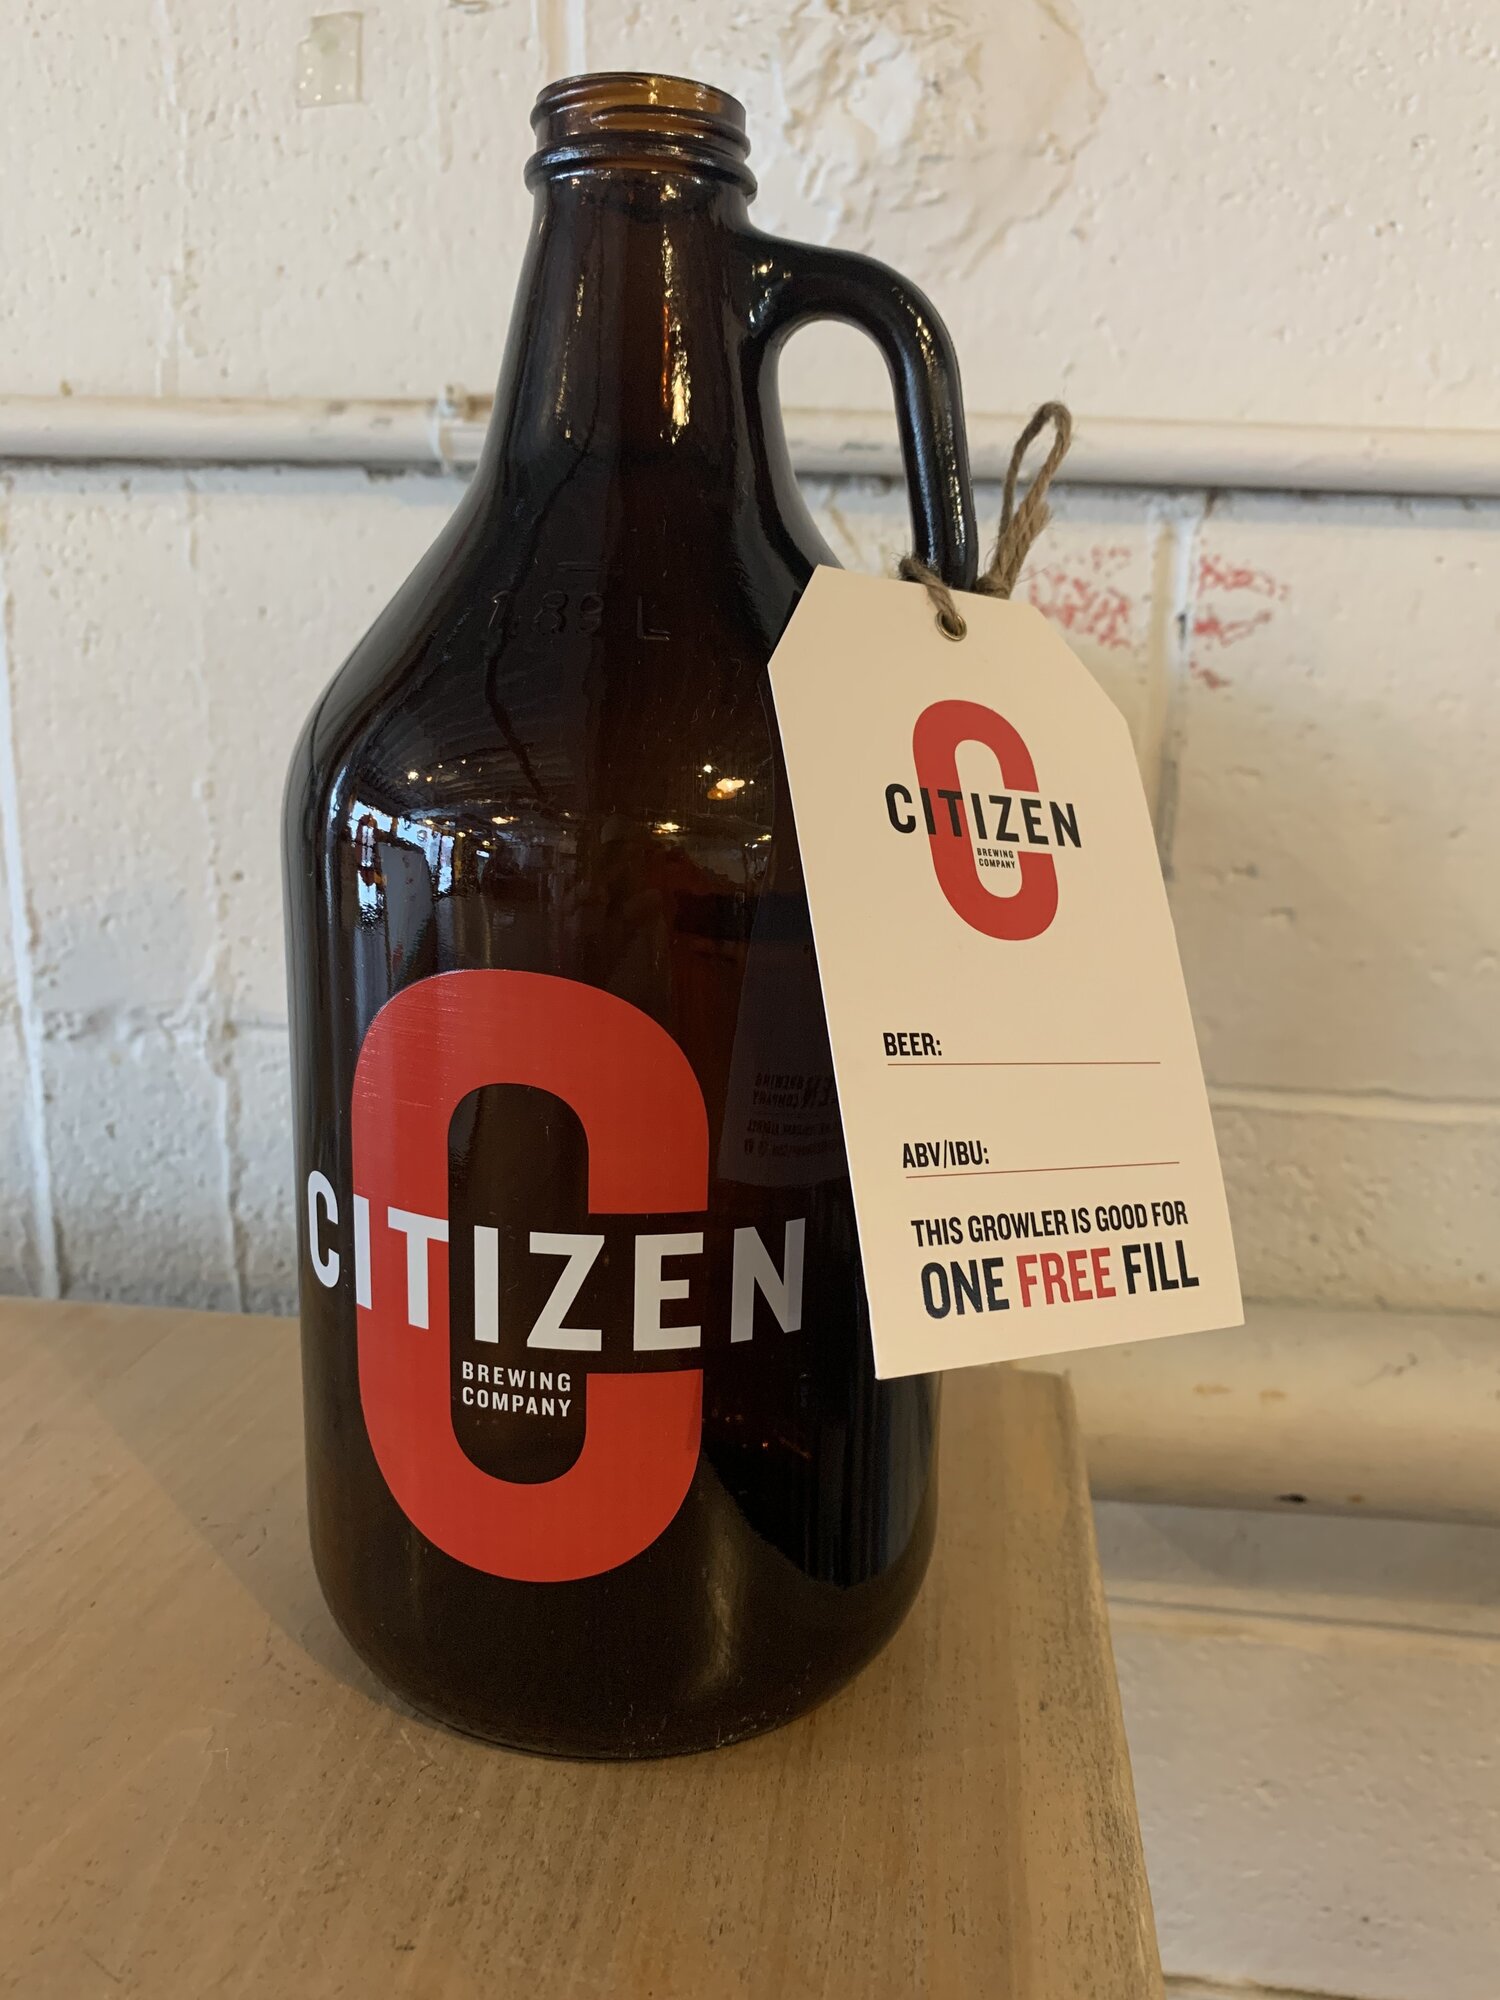 64 oz Growler + One Free Fill tag  Citizen Brewing Company | Northeast Calgary Brewery